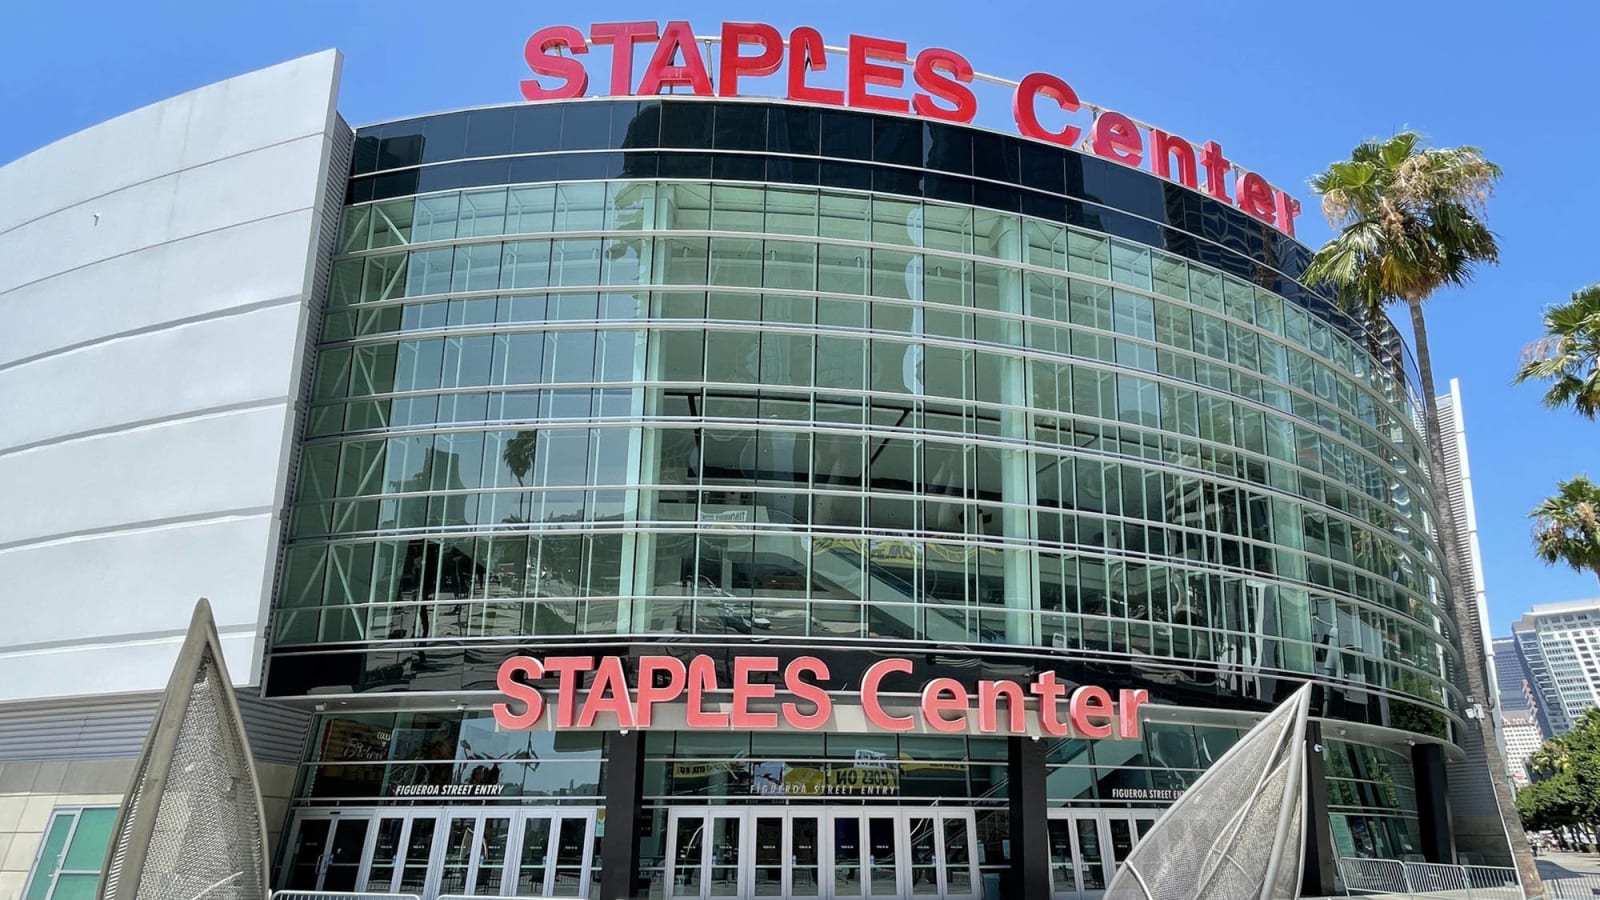 L.A. approves strict vax mandates that affect Lakers, Clippers